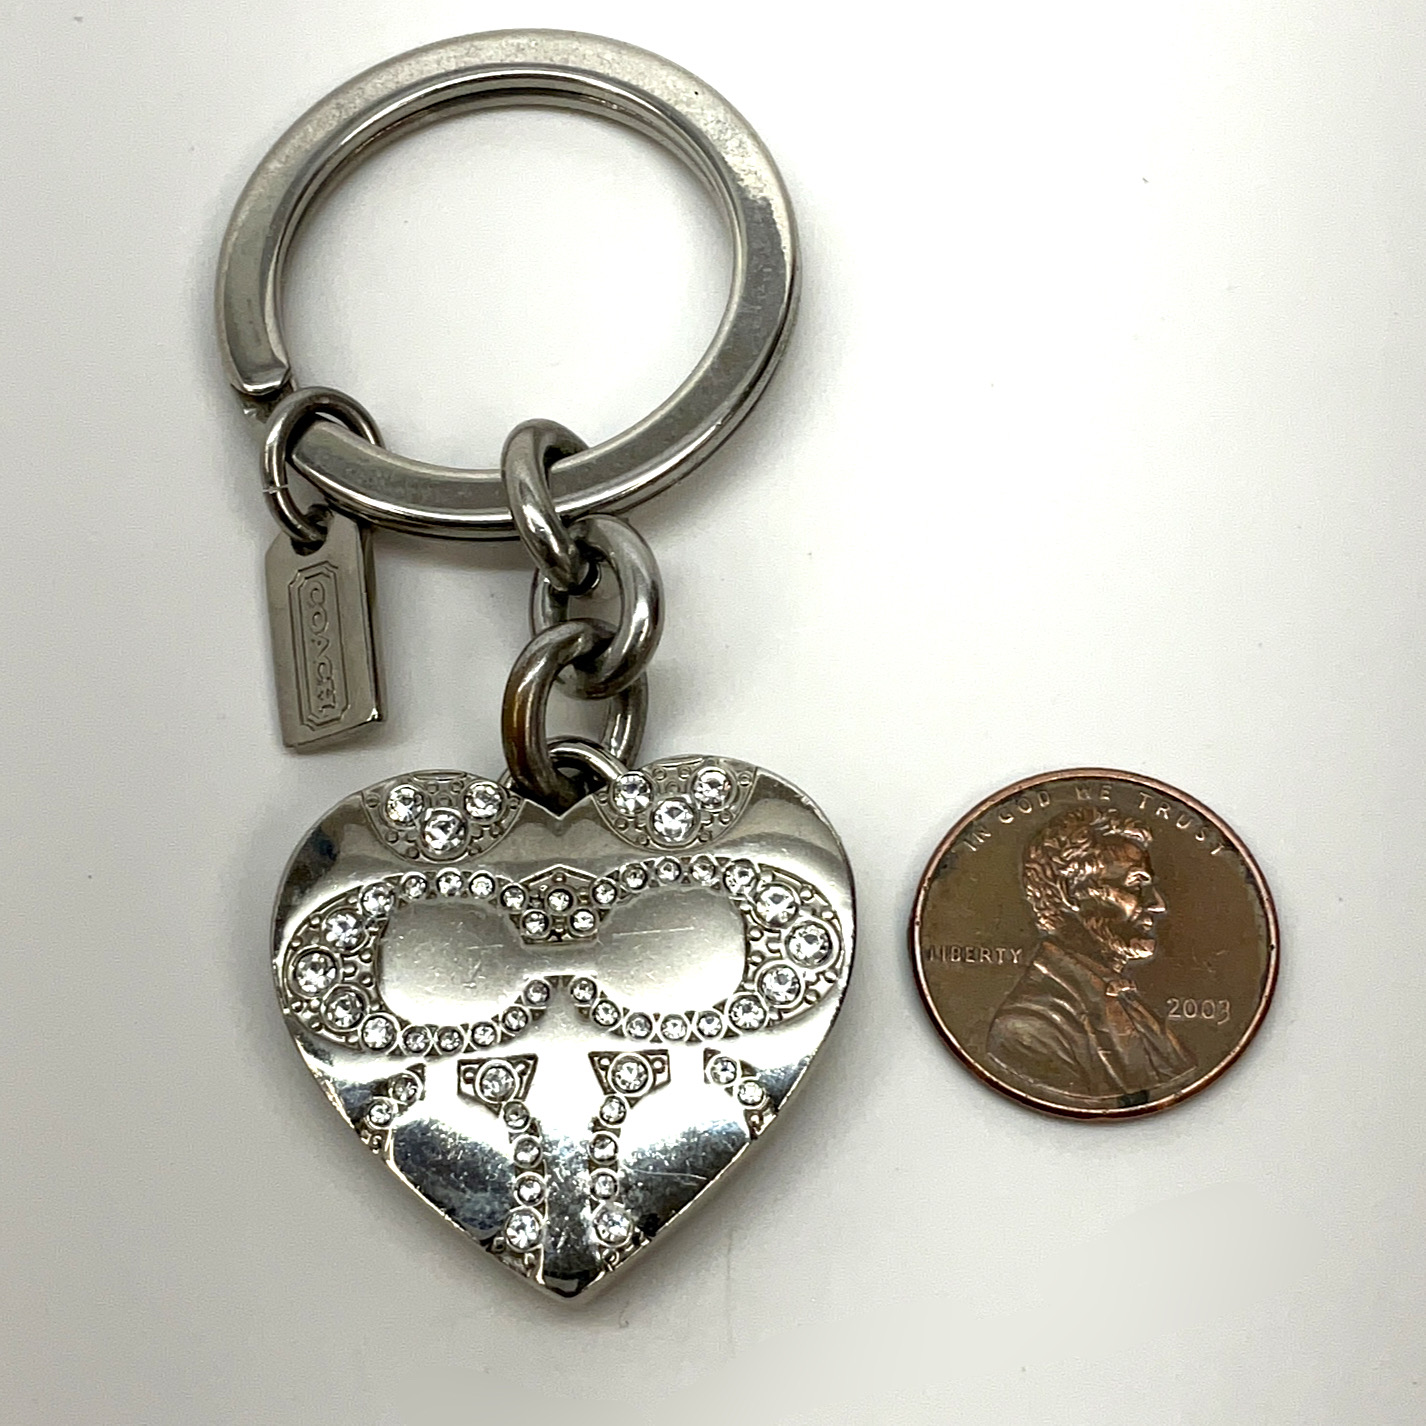 Buy the Designer Coach Silver-Tone Crystal Heart Locket Keychain With Dust  Bag